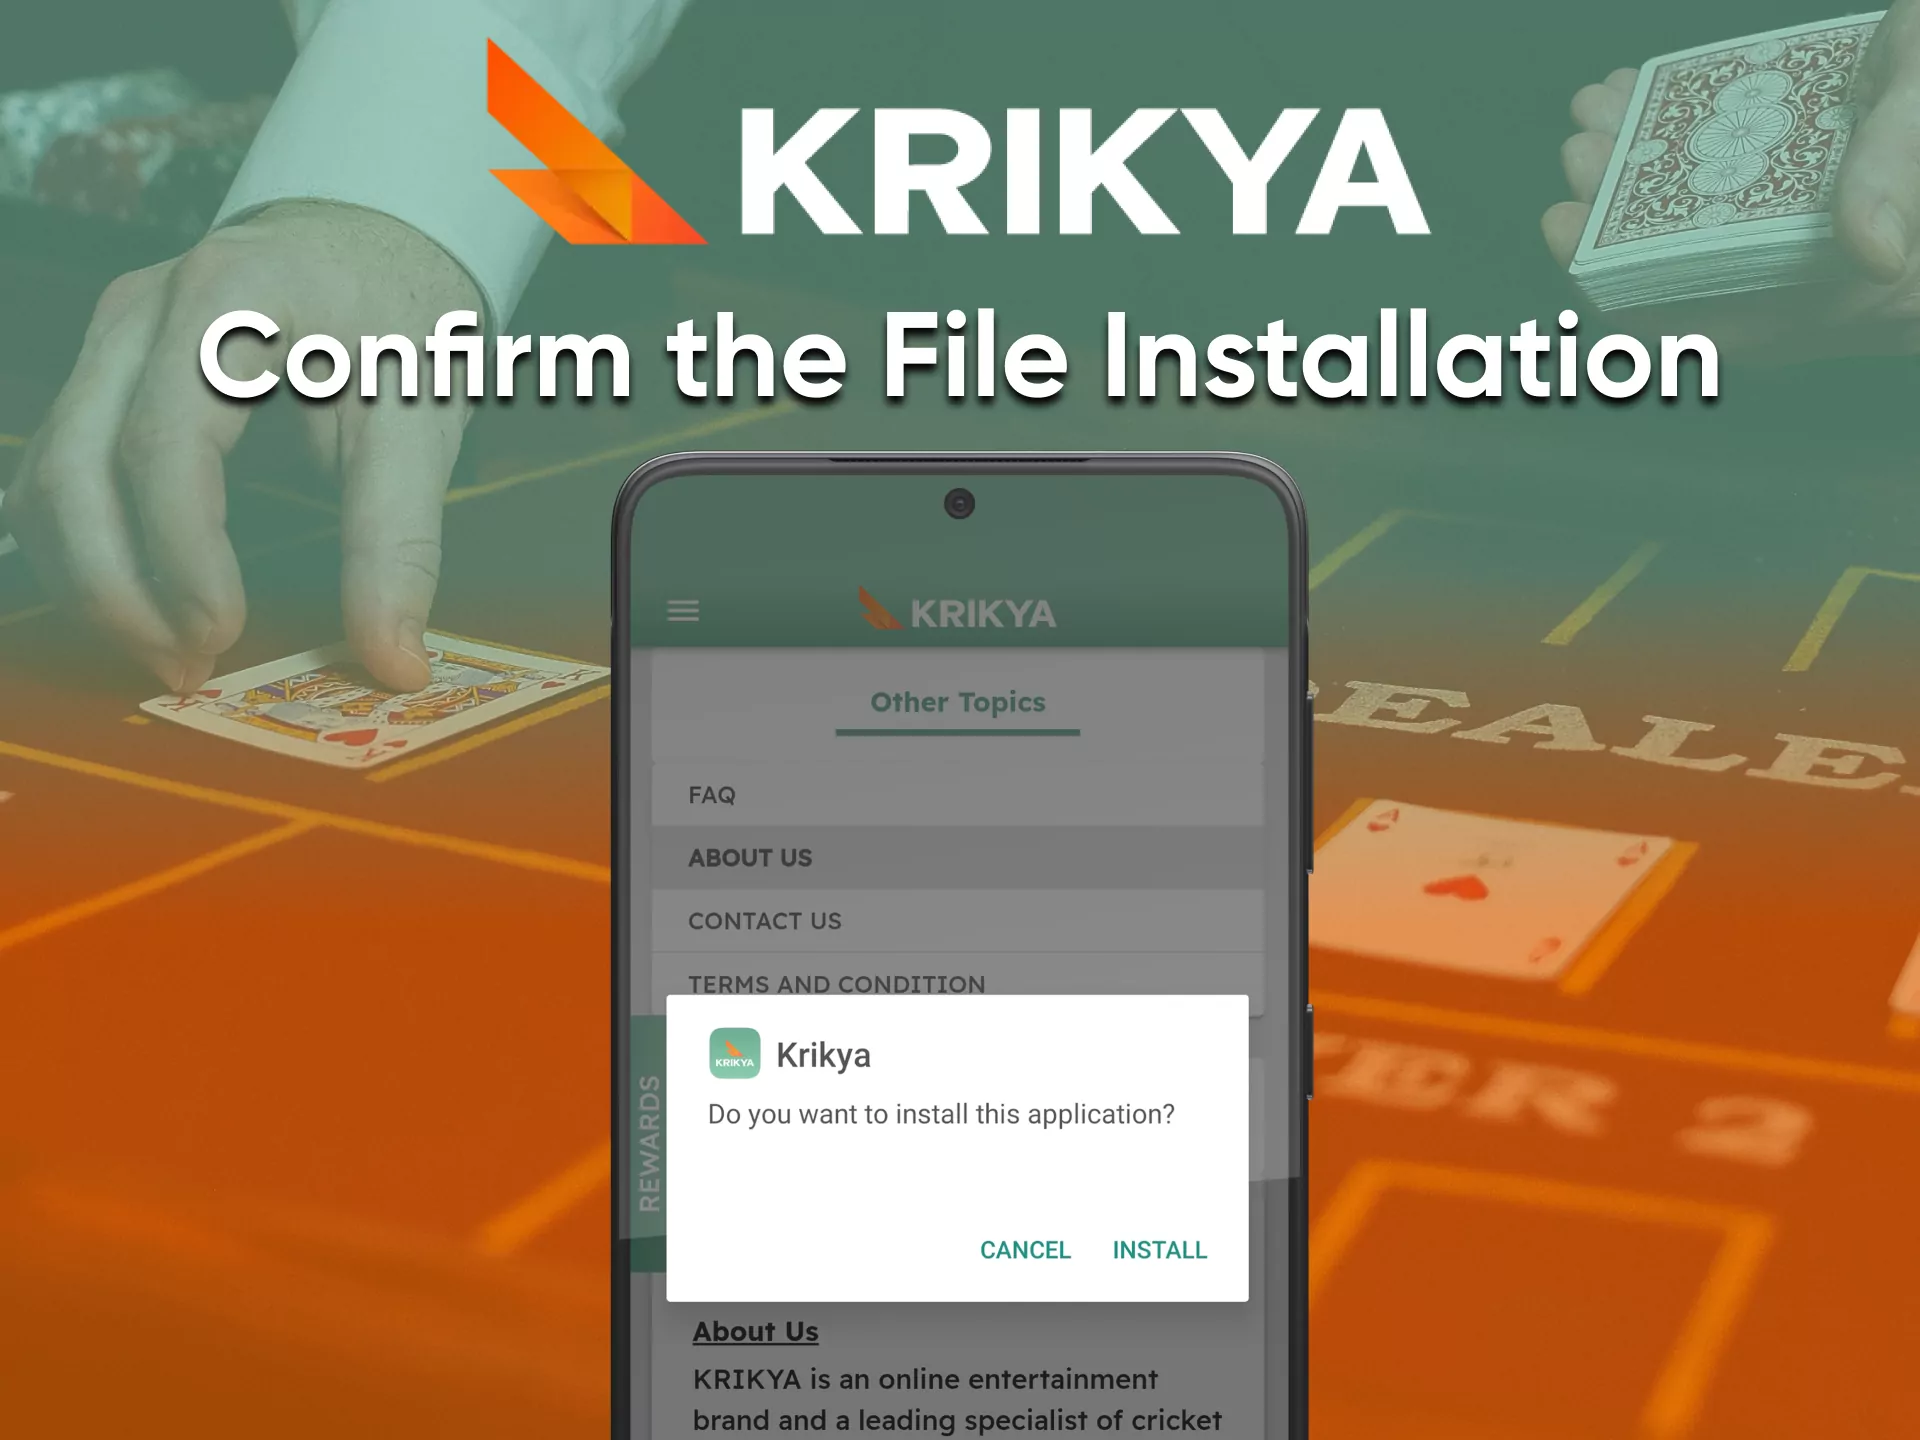 Confirm the installation of the Krikya app for future use.